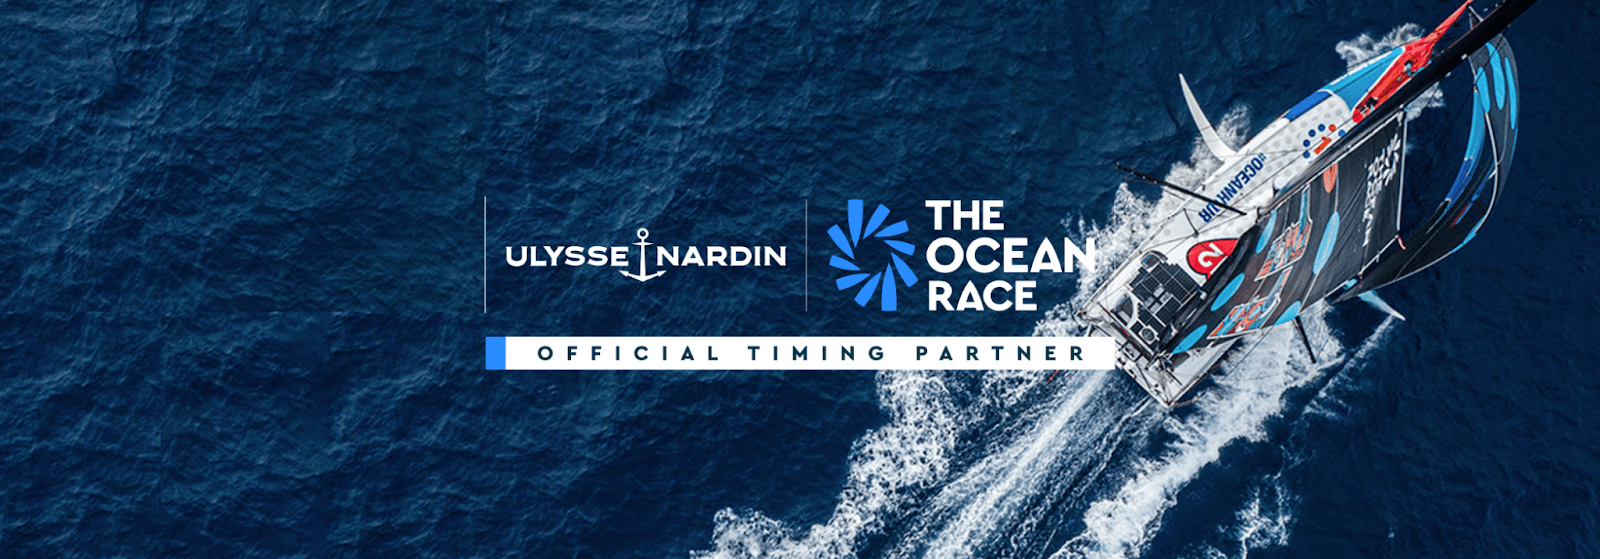  
ULYSSE NARDIN Launches A New Ocean Race Diver Chronograph
 